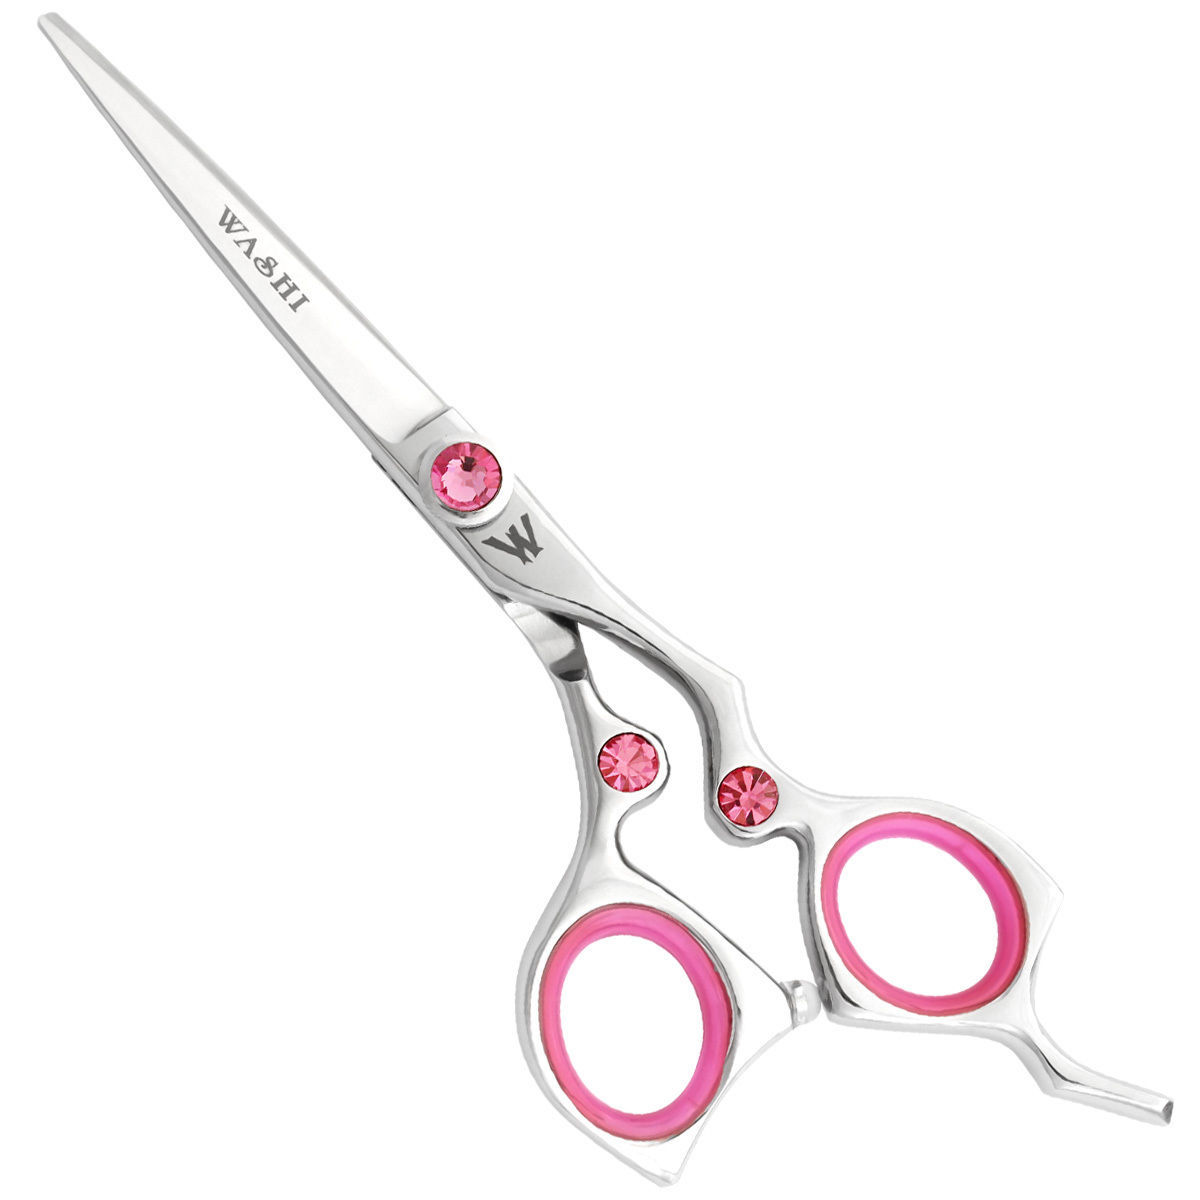 Primary image for washi ice shear ONLY scissor zm japanese 440c steel beauty barber hair pink